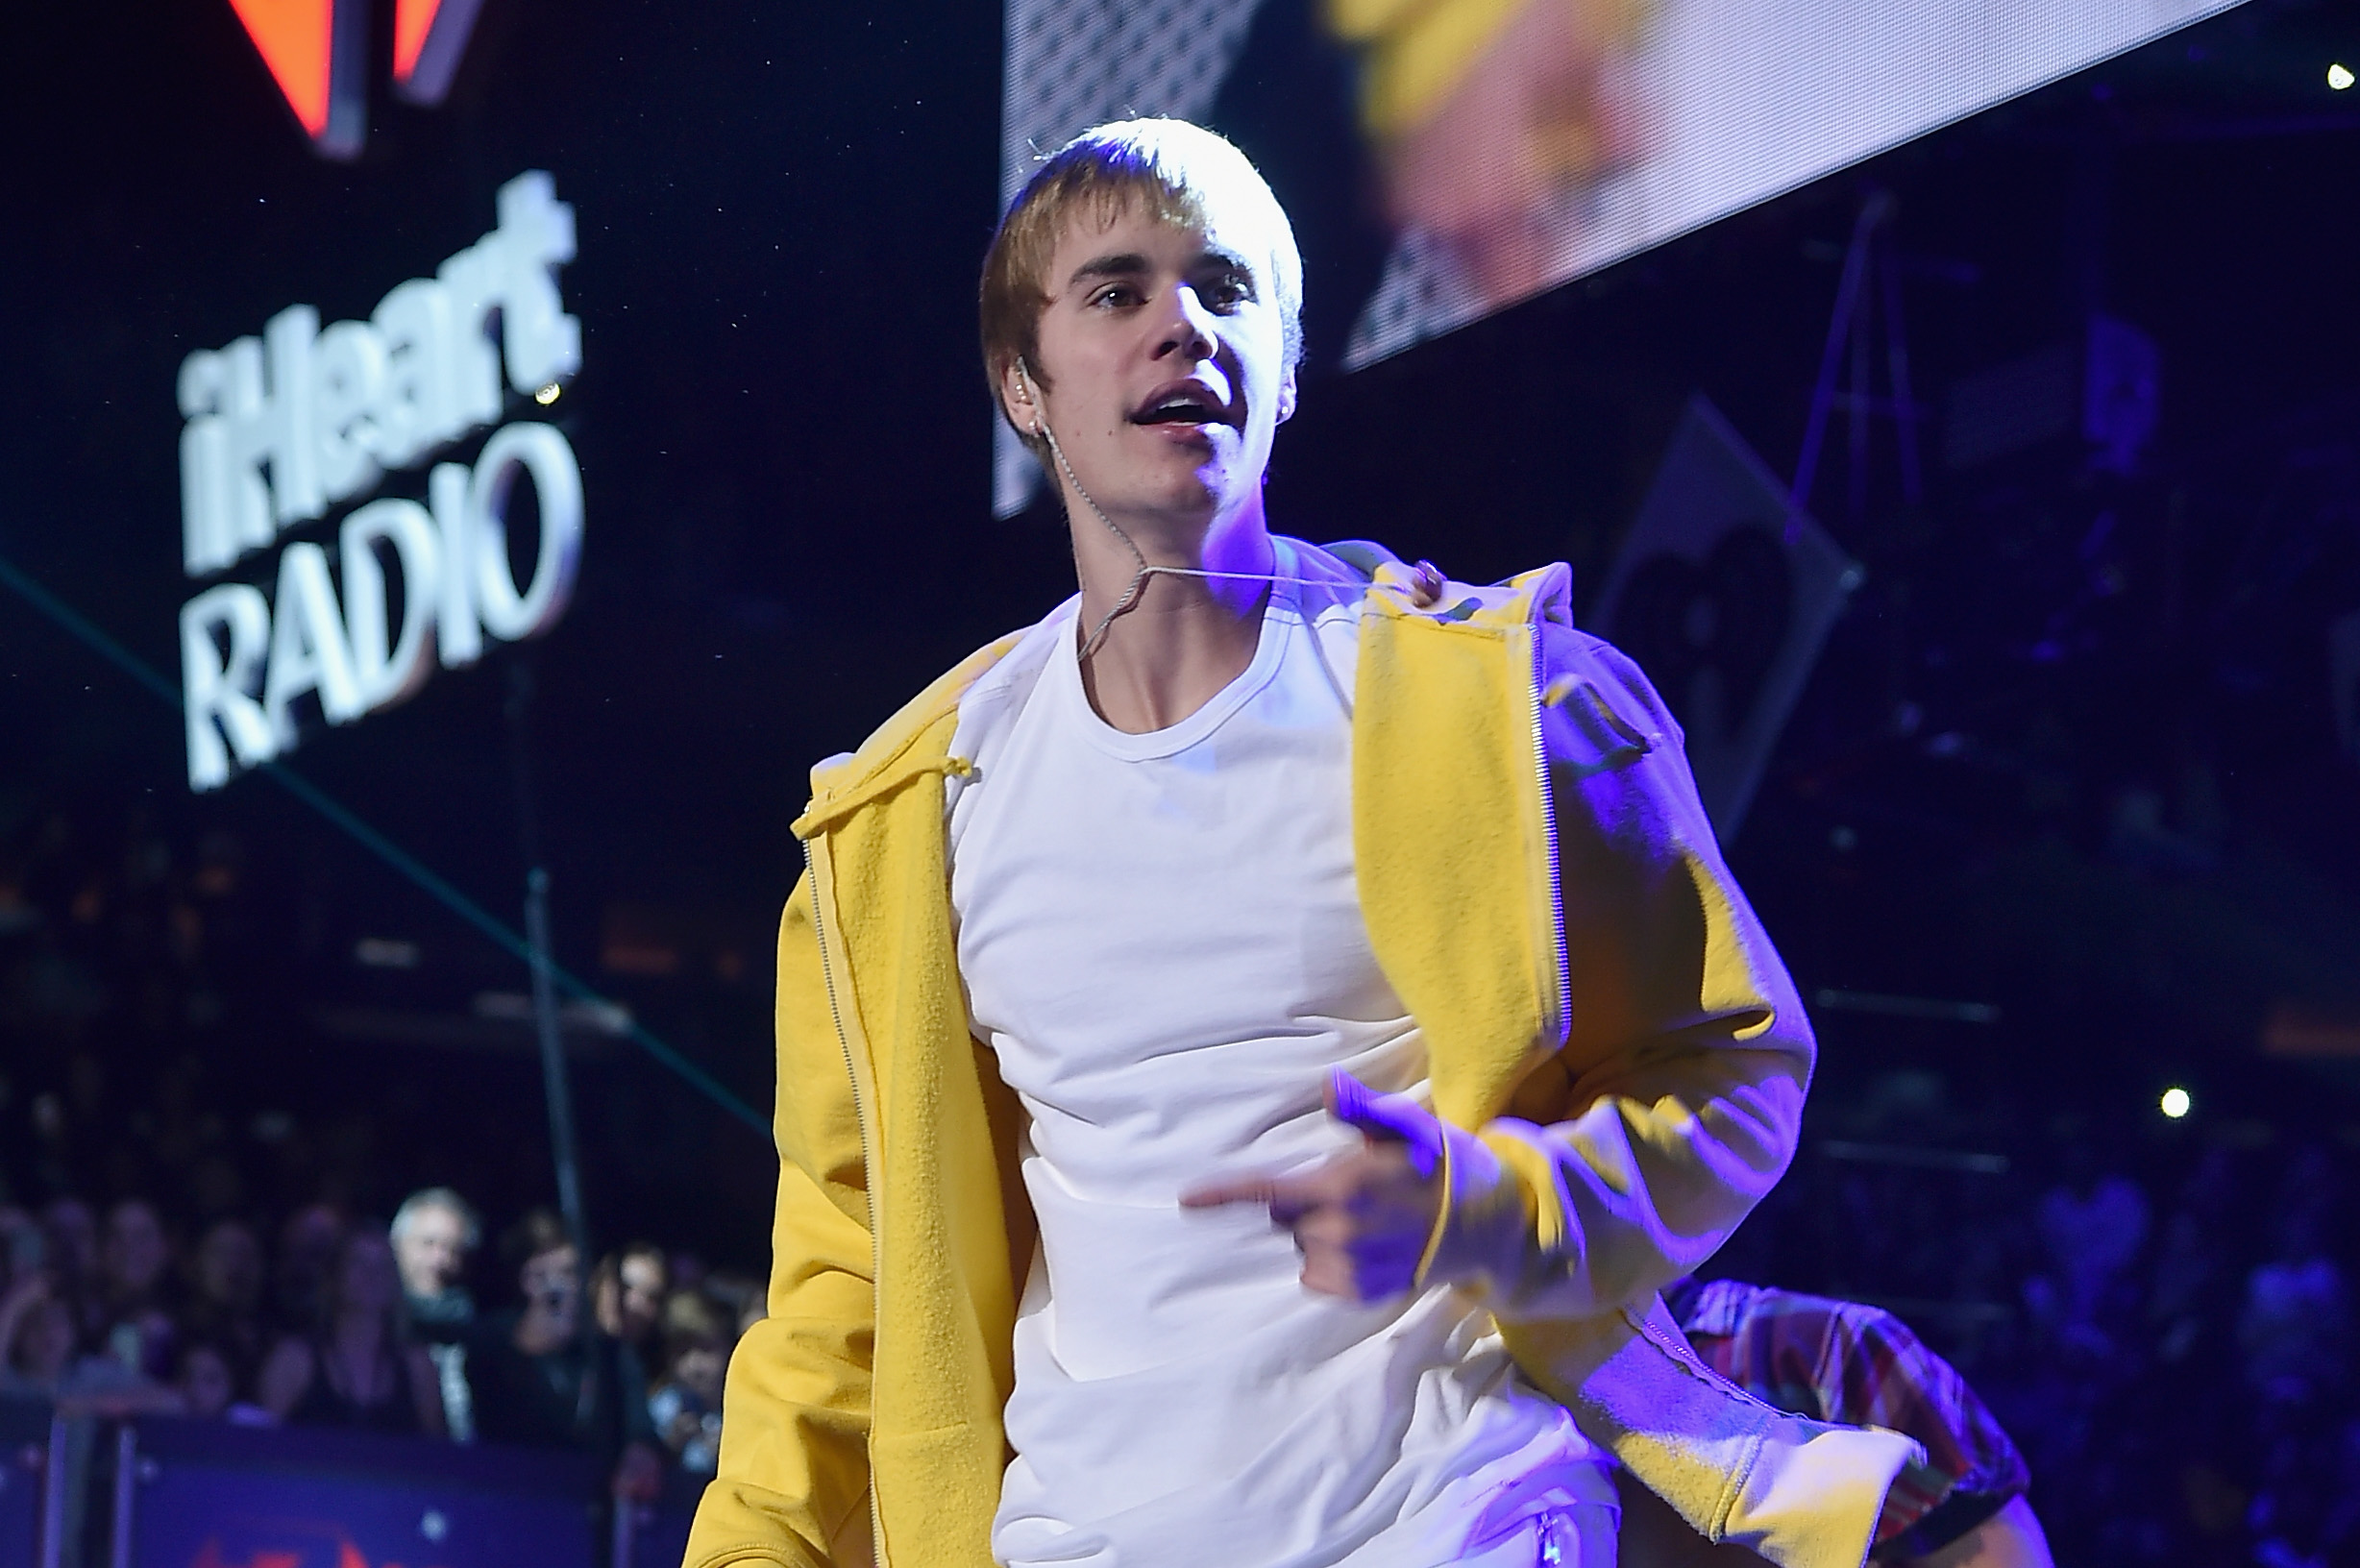 NEW YORK, NY - DECEMBER 09: Justin Bieber performs onstage during Z100's Jingle Ball 2016 at Madison Square Garden on December 9, 2016 in New York, New York.   Theo Wargo/Getty Images for iHeart/AFP